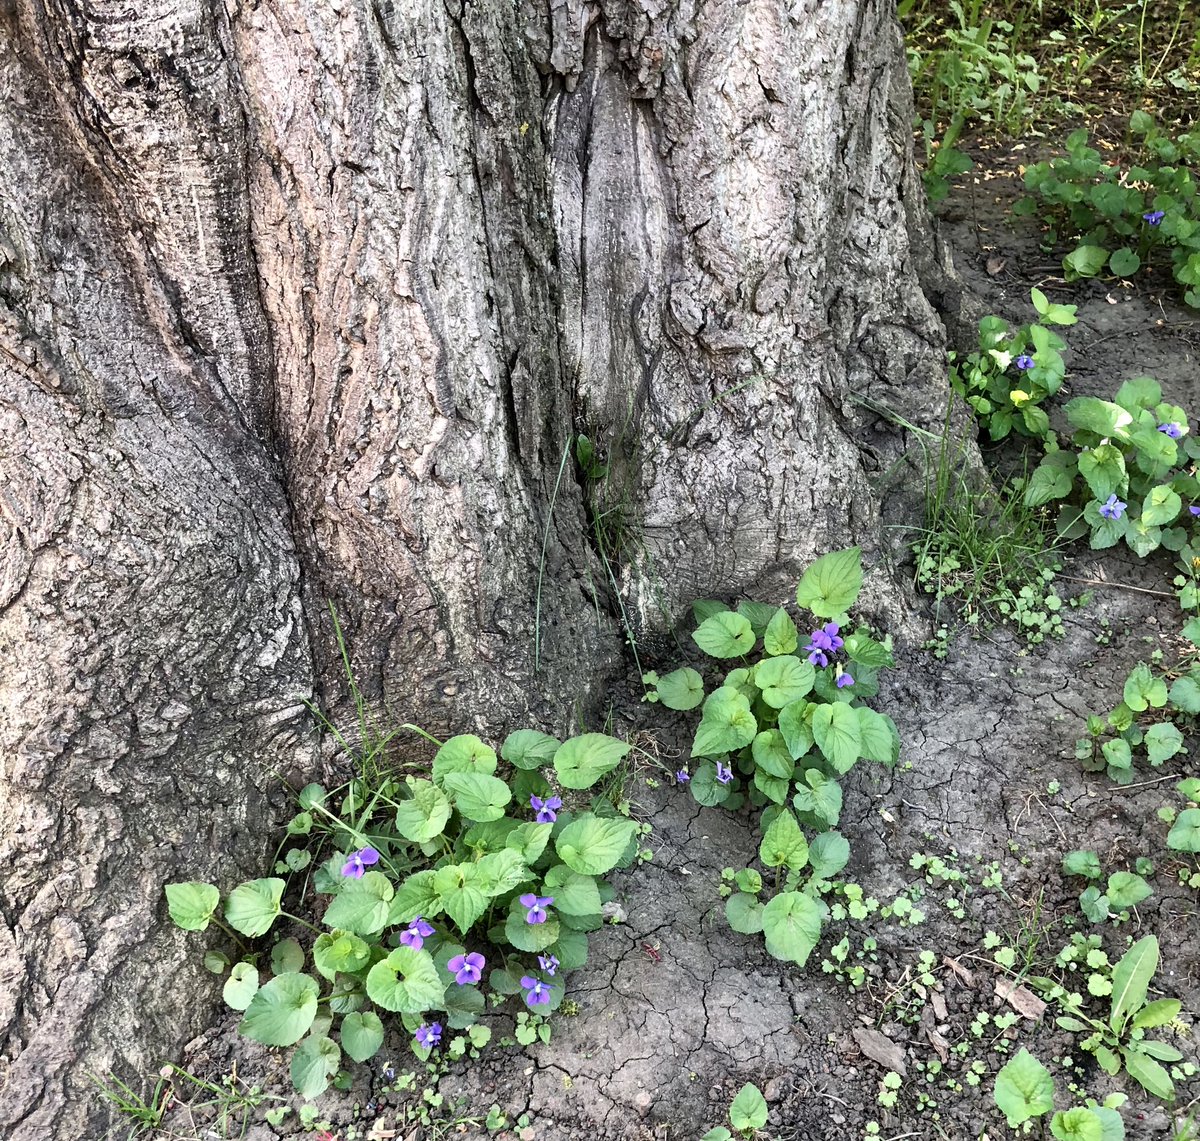 Just noticed these violets at the base of our old tree. Don’t think they’ve ever been there before.